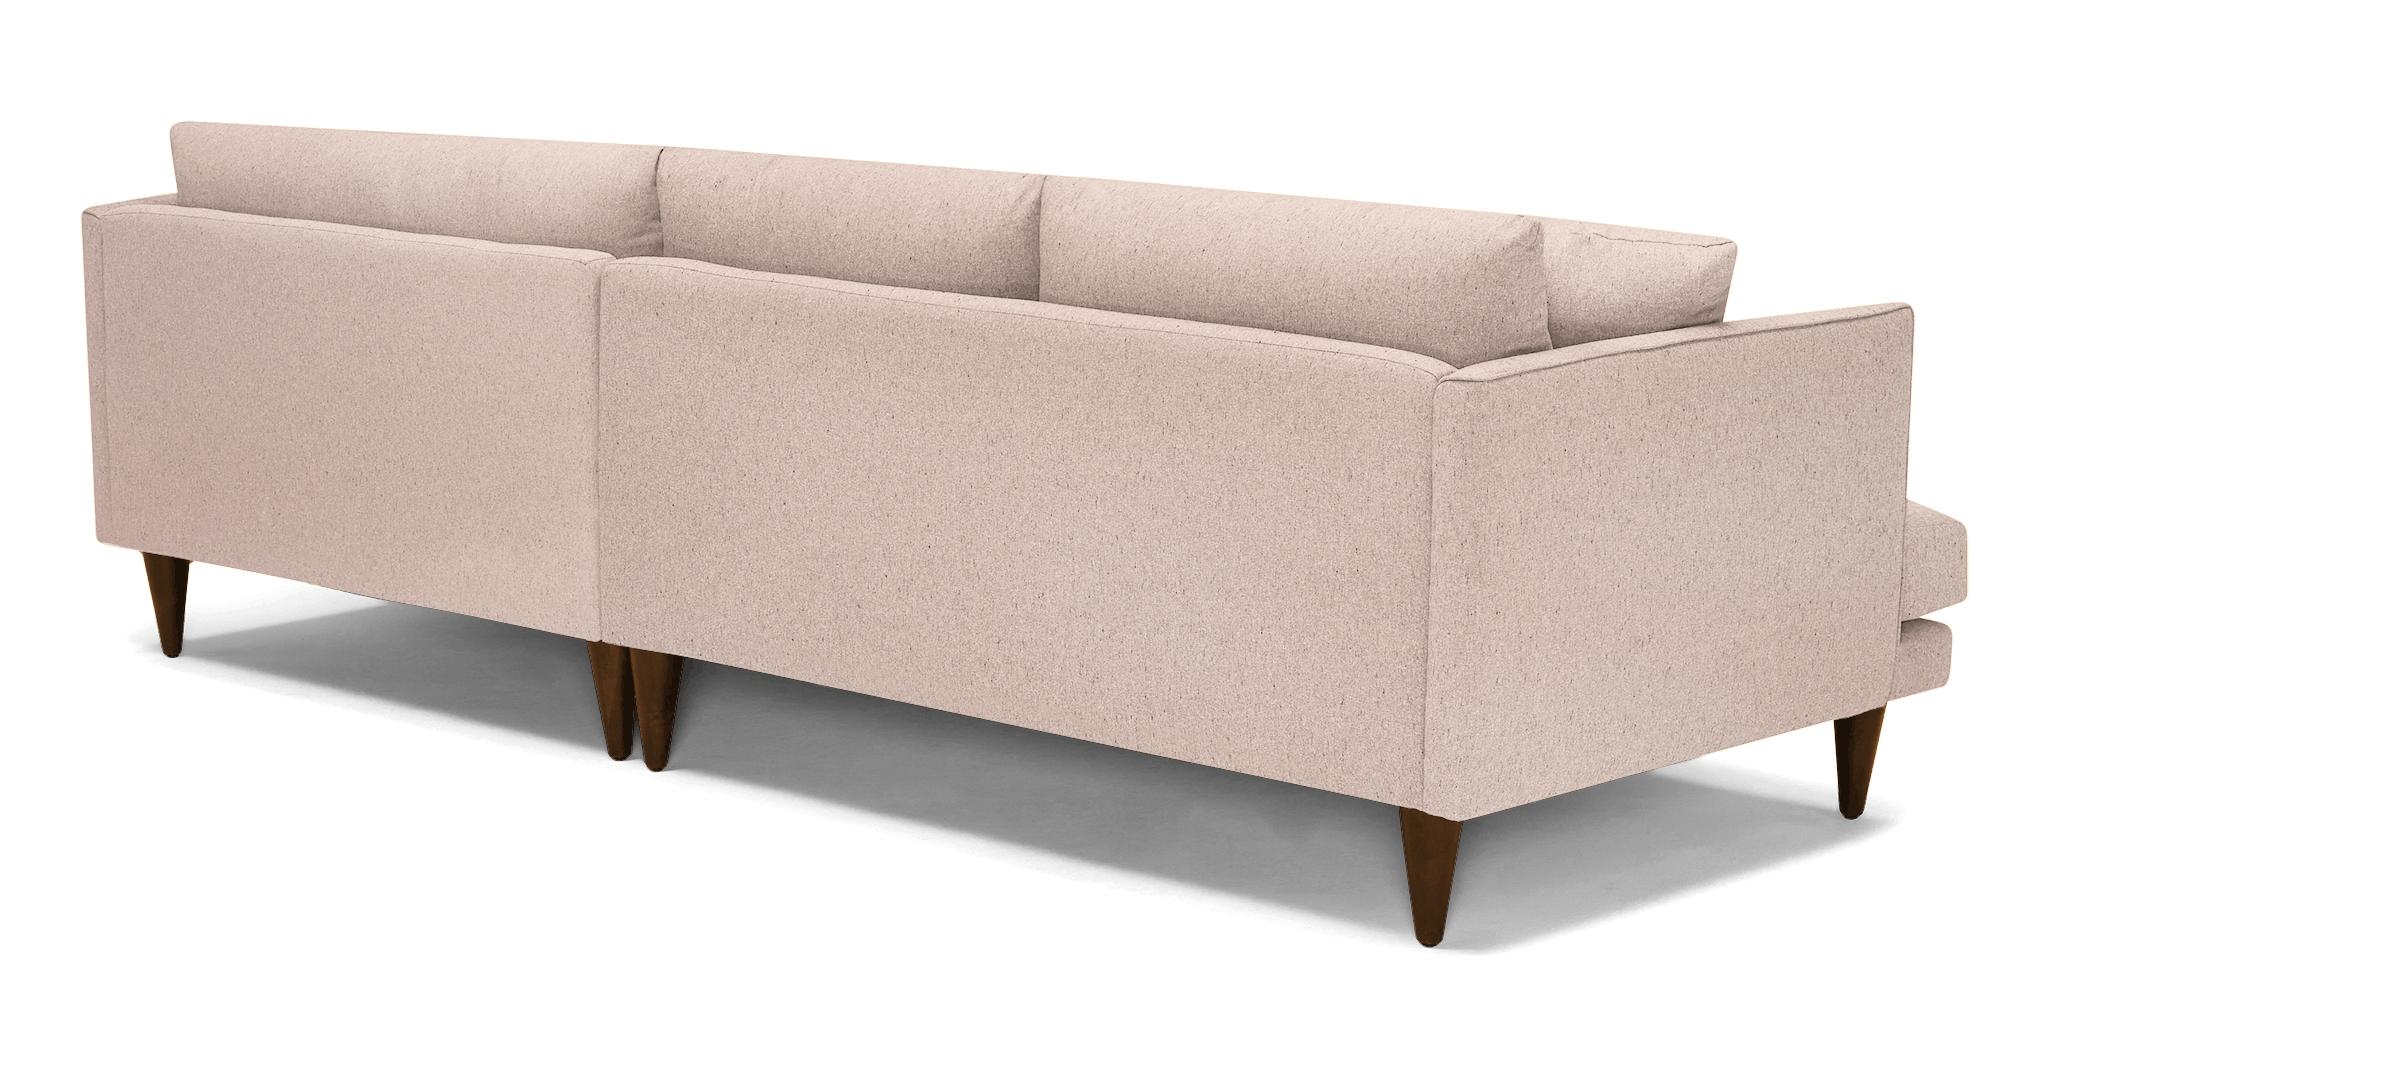 Pink Lewis Mid Century Modern Sectional - Prime Blush - Mocha - Right - Cone - Image 3